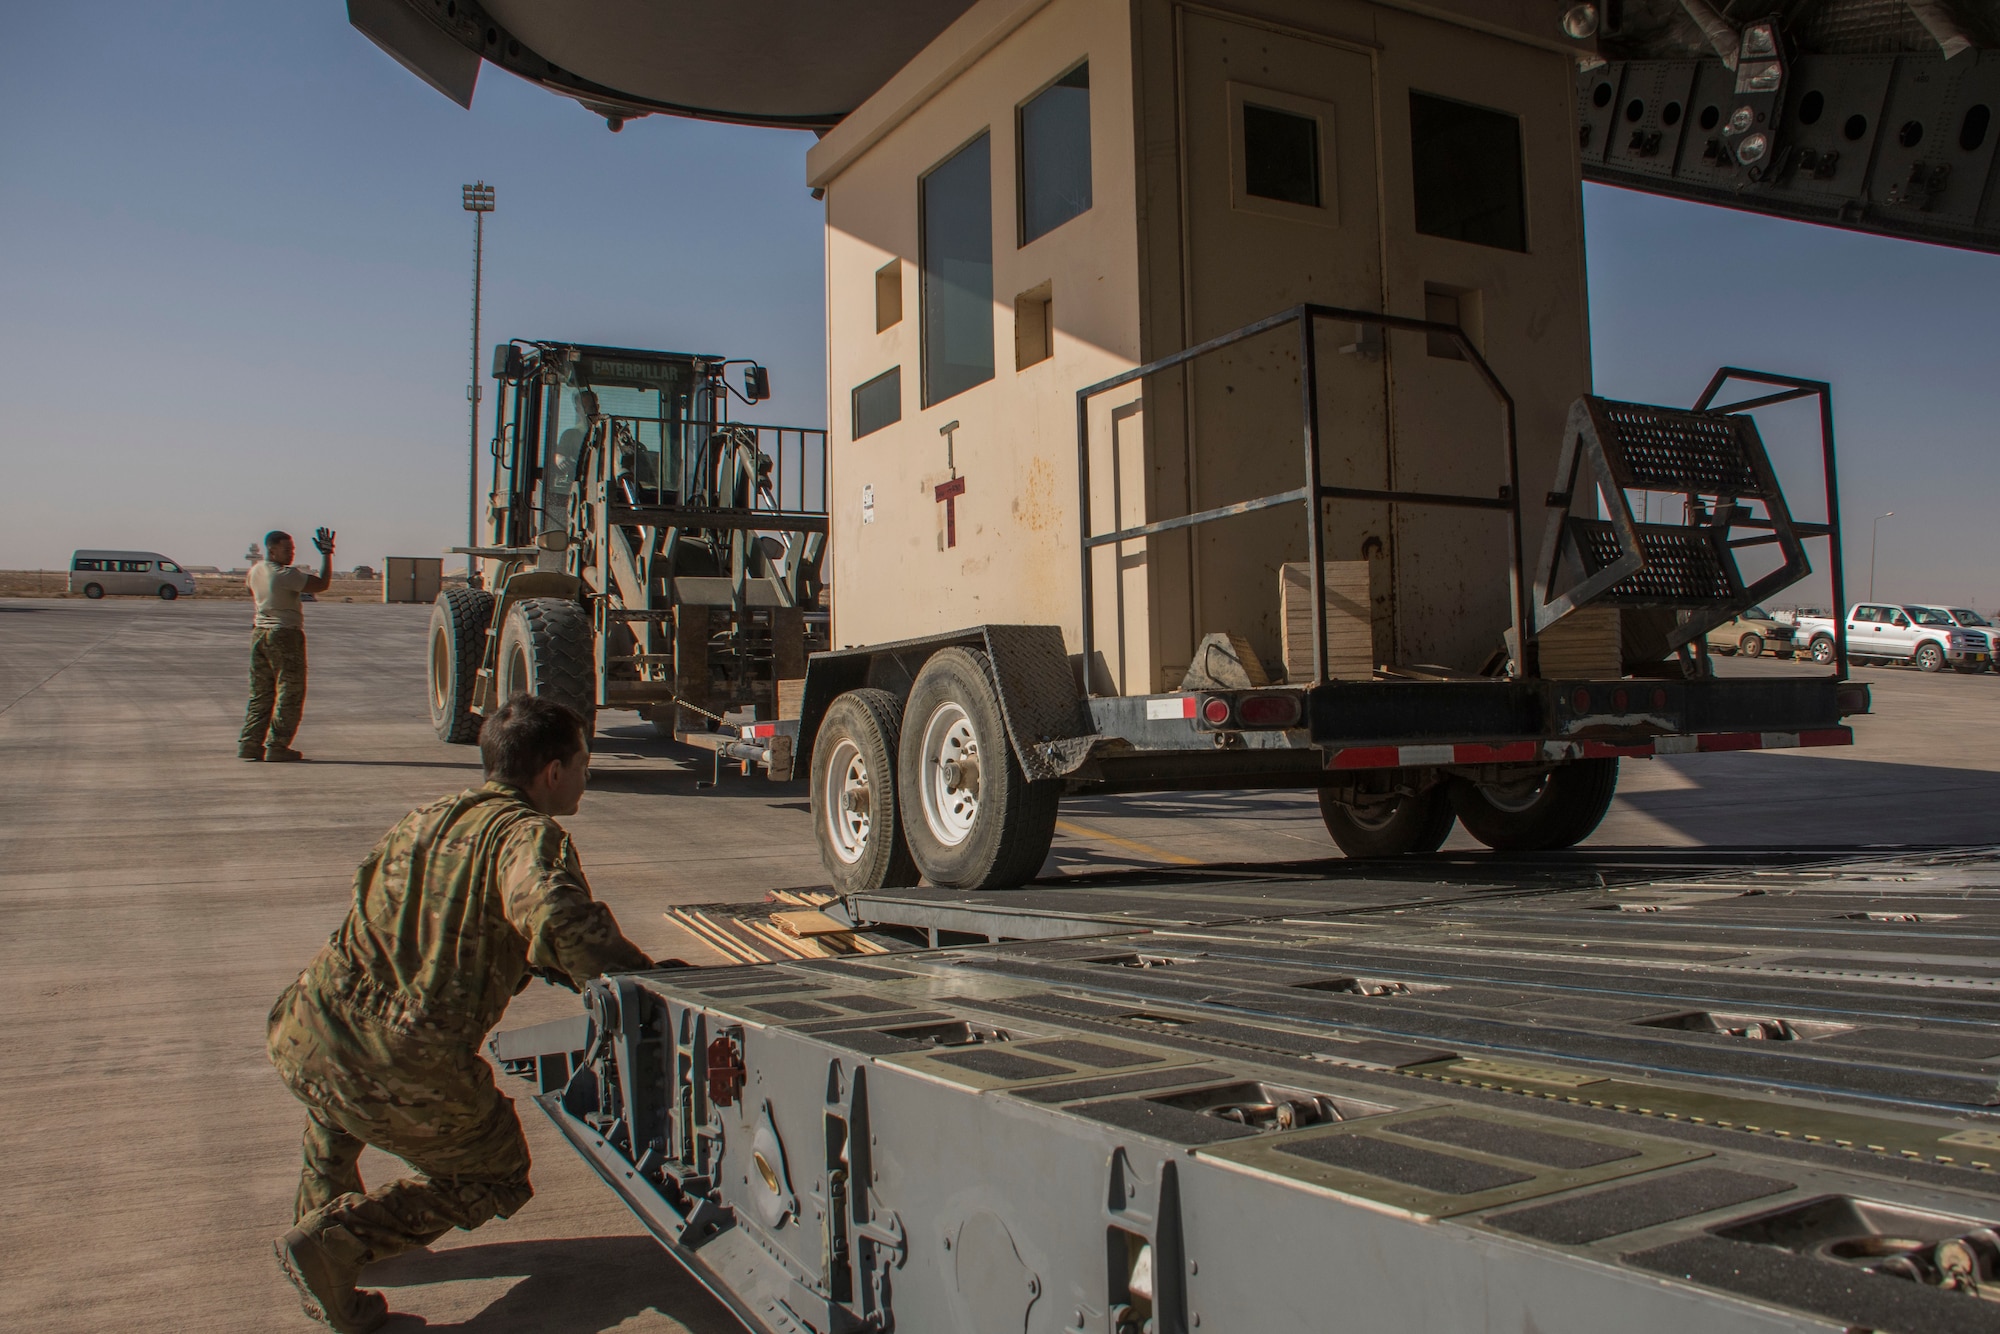 An aerial porter, left, and a loadmaster, right, work together to guide a forklift in towing a structure out of a C-17 Globemaster III at Al Asad Air Base, Iraq, Jan. 9, 2017. Loadmasters and aerial porters often work off each other’s expertise to efficiently onload and offload aircraft. (U.S. Air Force photo/Senior Airman Andrew Park)